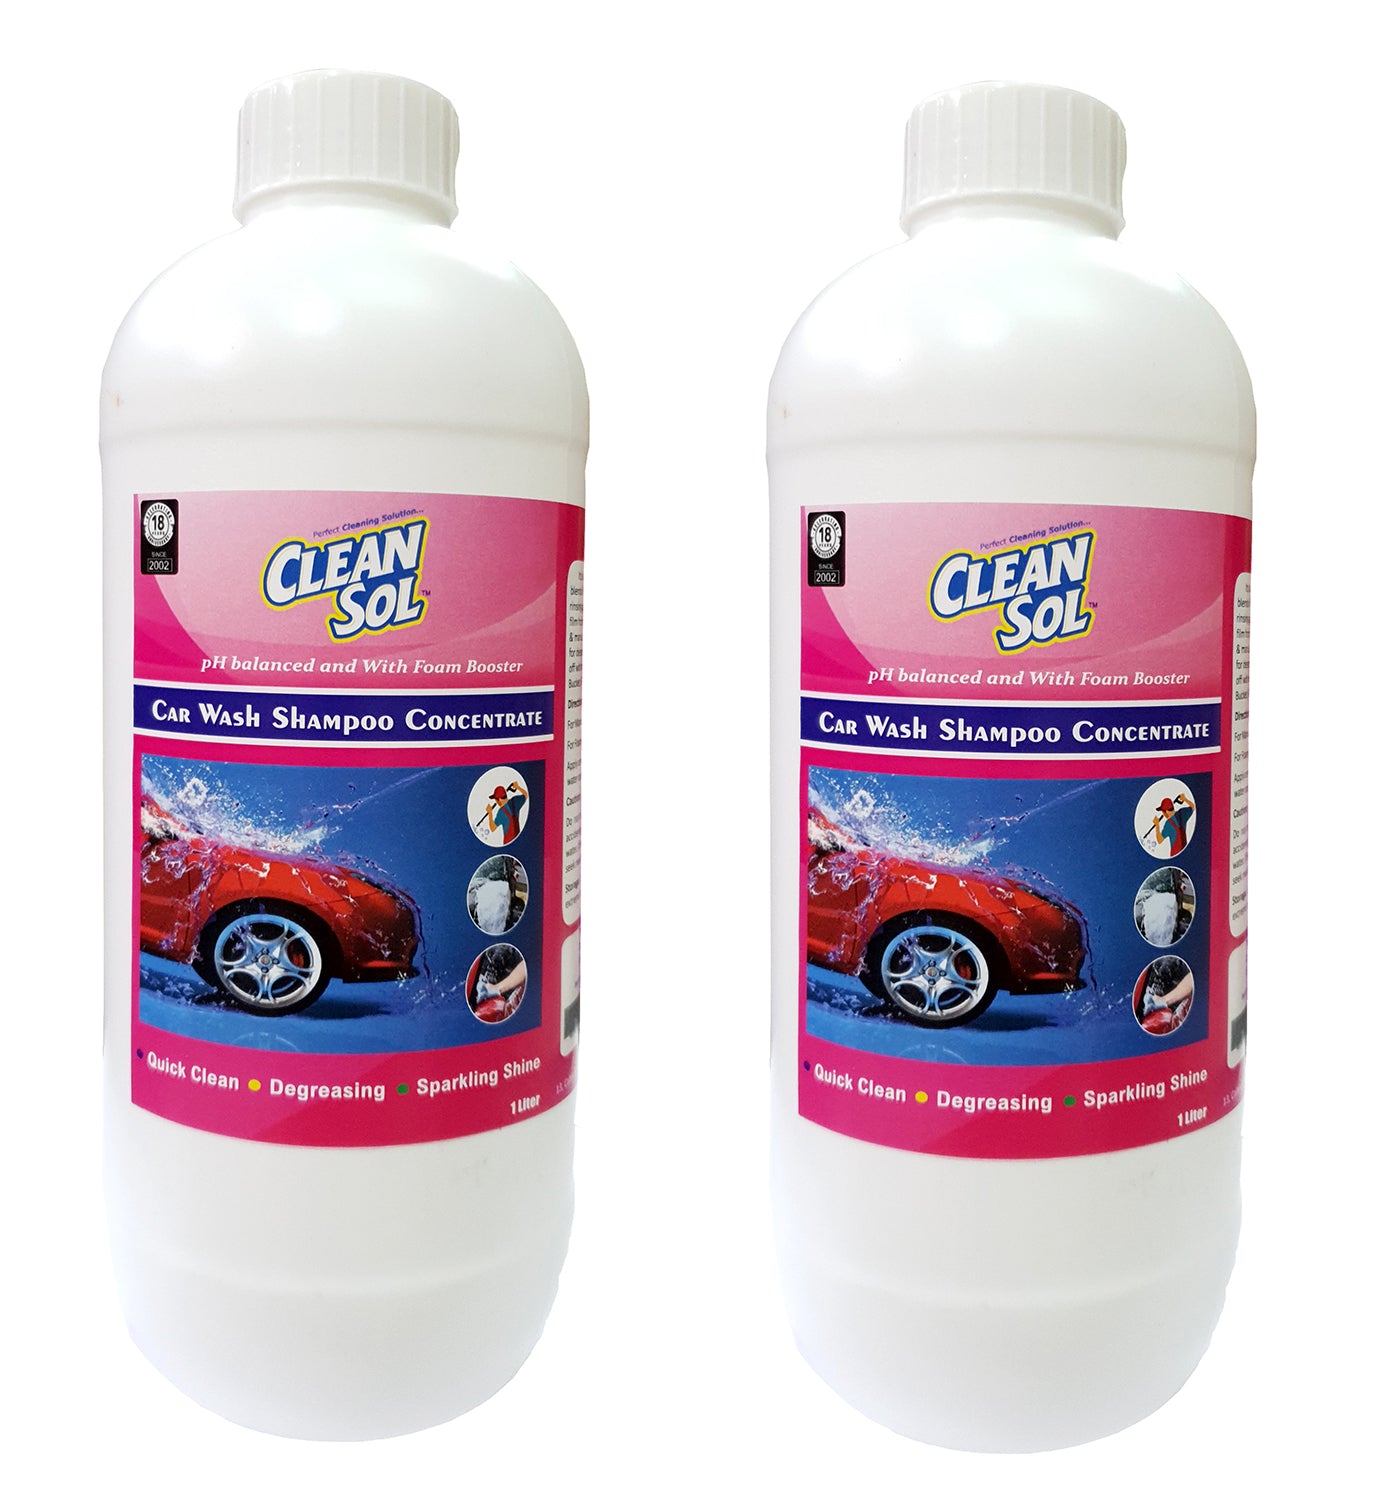 Cleansol Car Wash Shampoo Concentrate - 5 Litre (Phosphate free, High foam, pH Balanced and Easy rinse off)